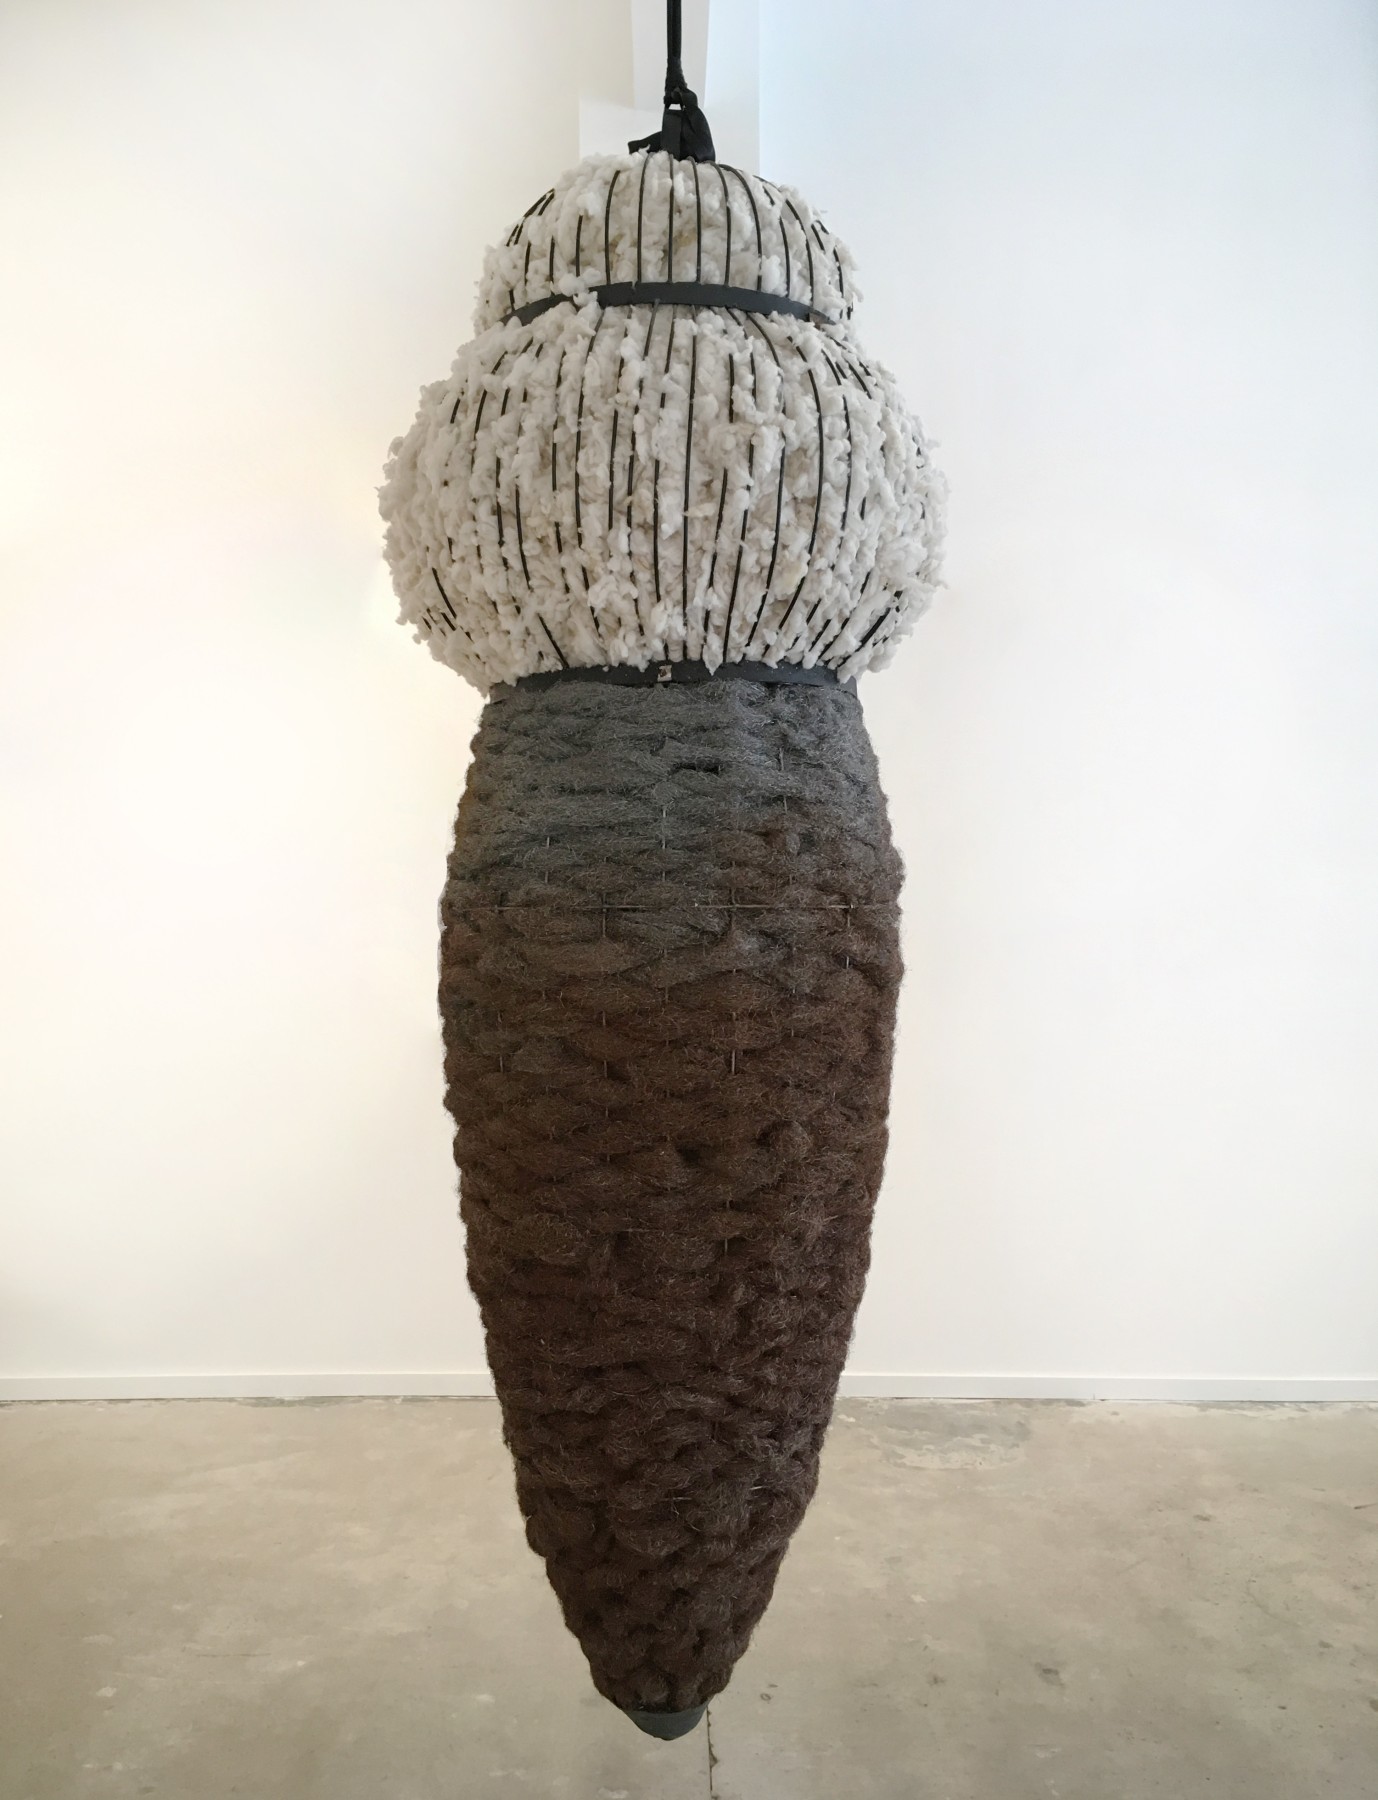 Molly Sawyer The Strength of Shadows steel wool, sheep fleece, steel, rust, satin ribbon Dimensions variable, sculpture